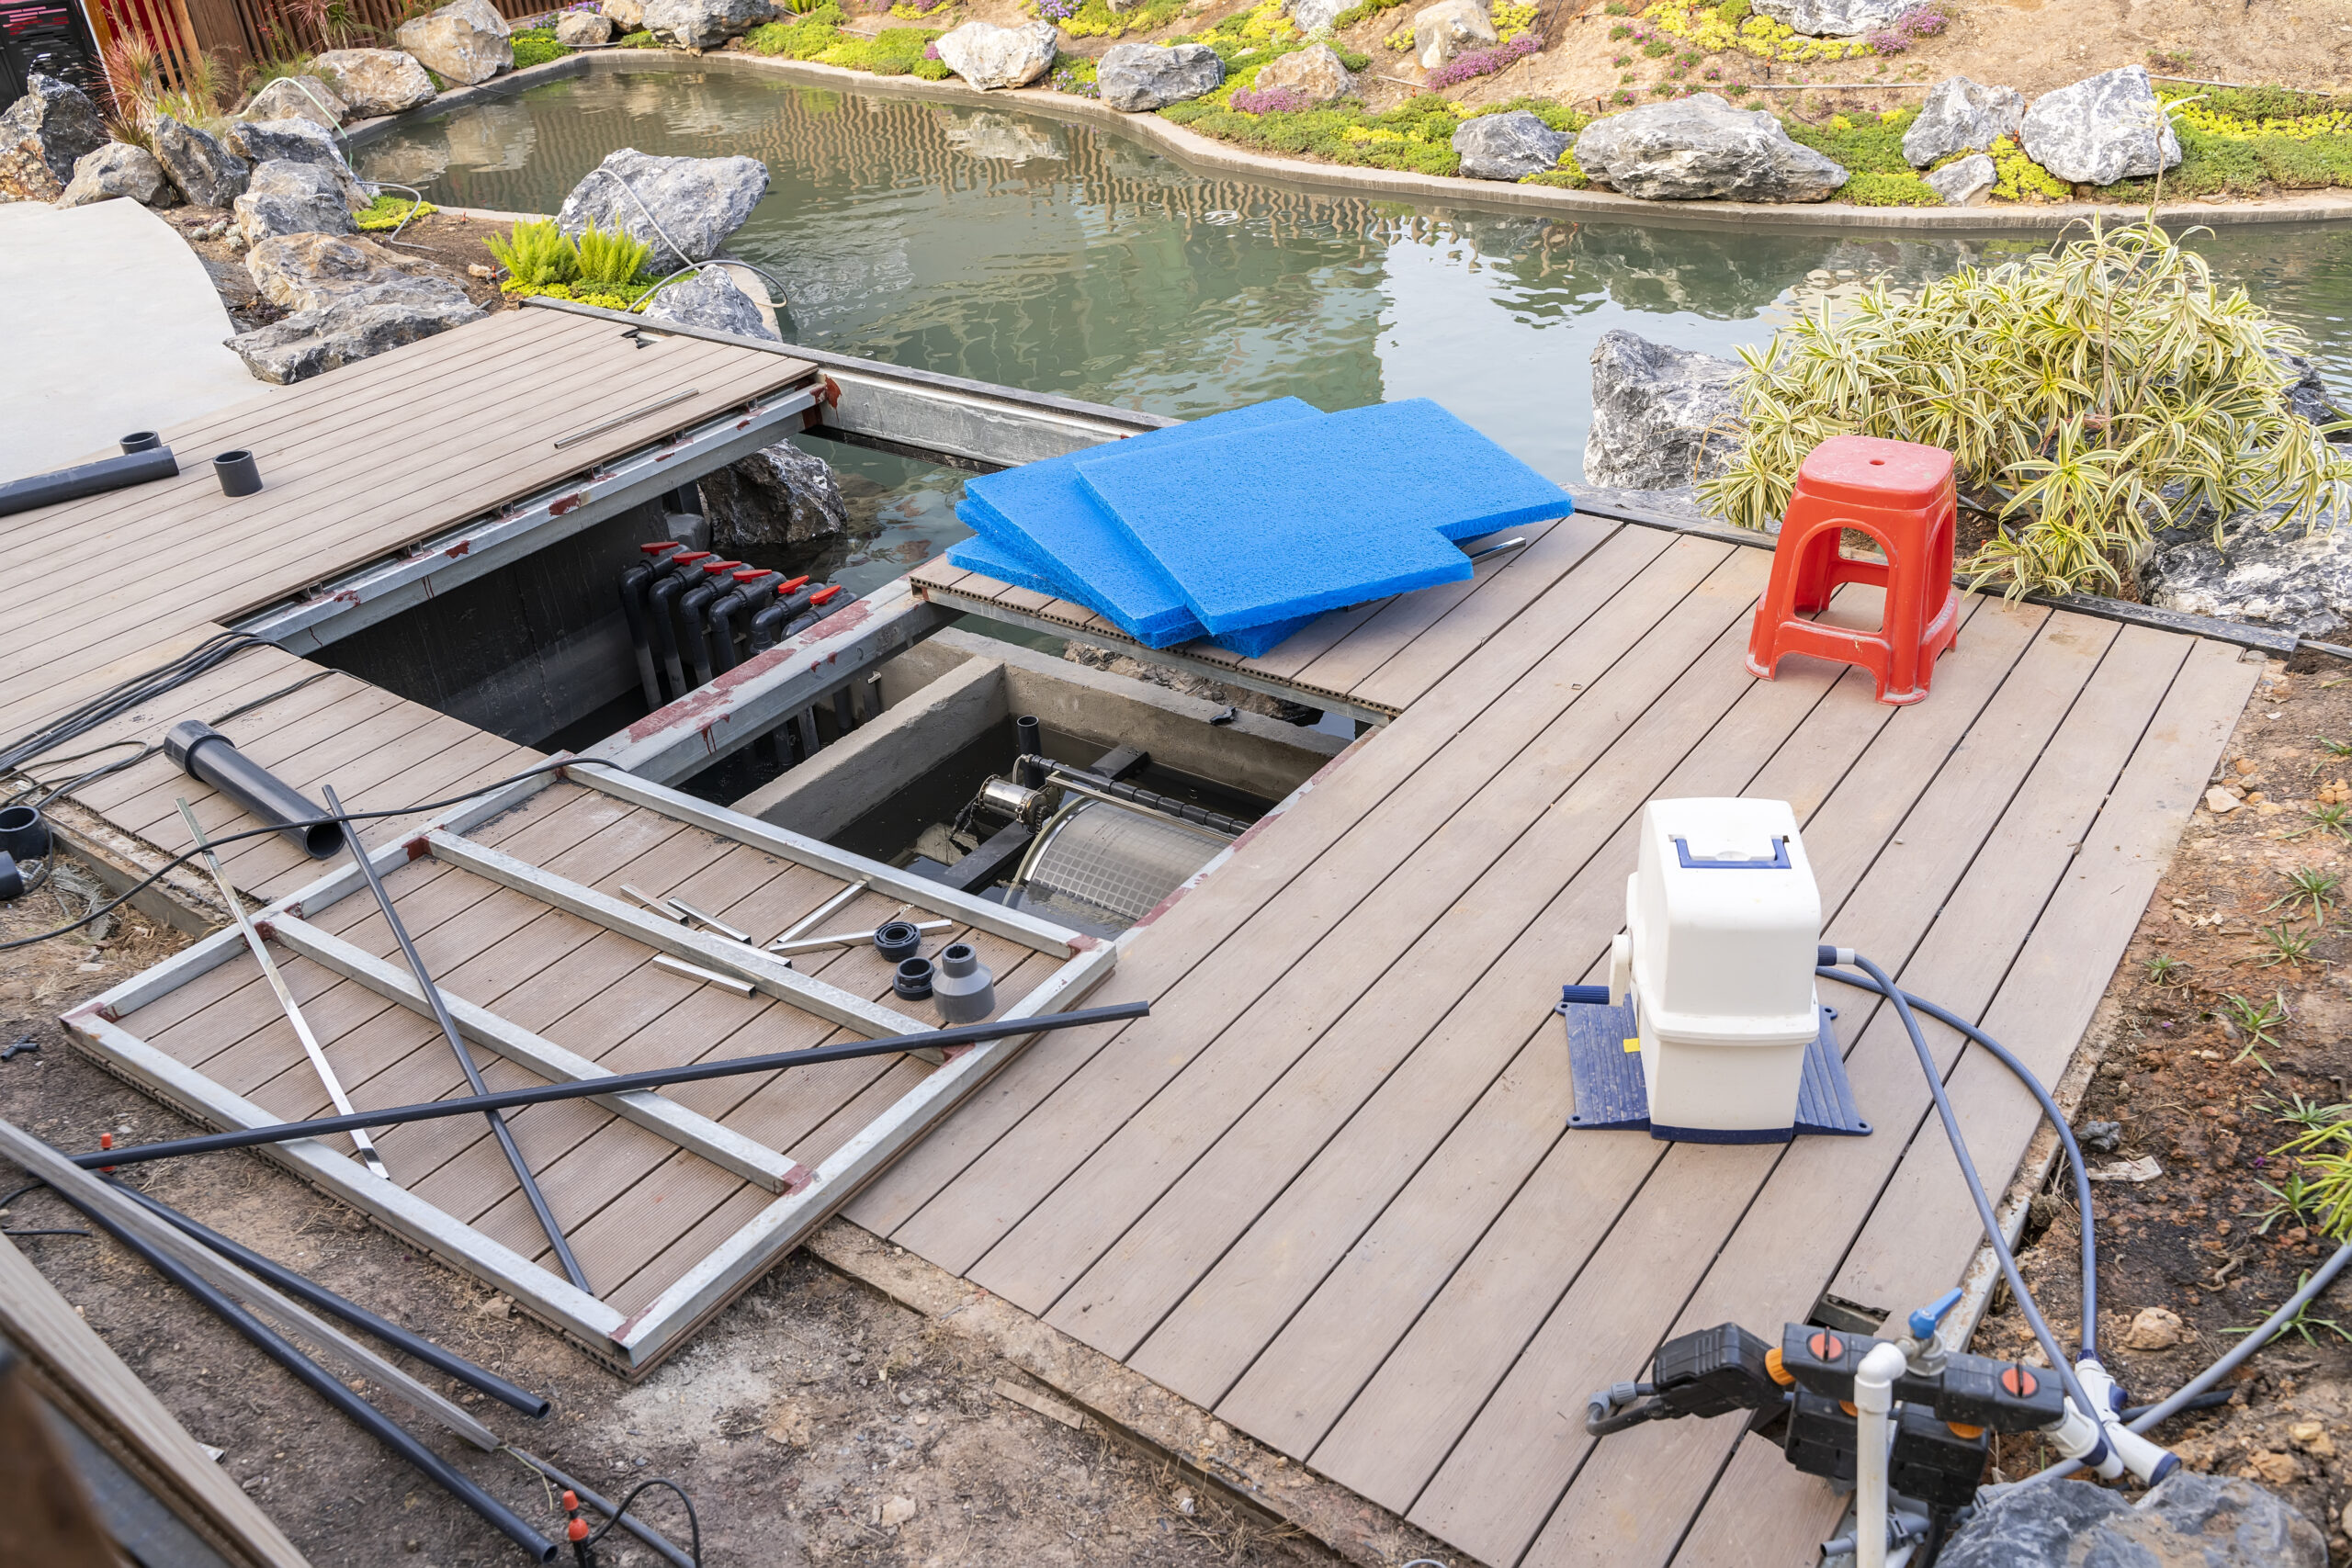 Pond Filter System for keeping,providing a means to remove harmful substances and improve overall water quality.